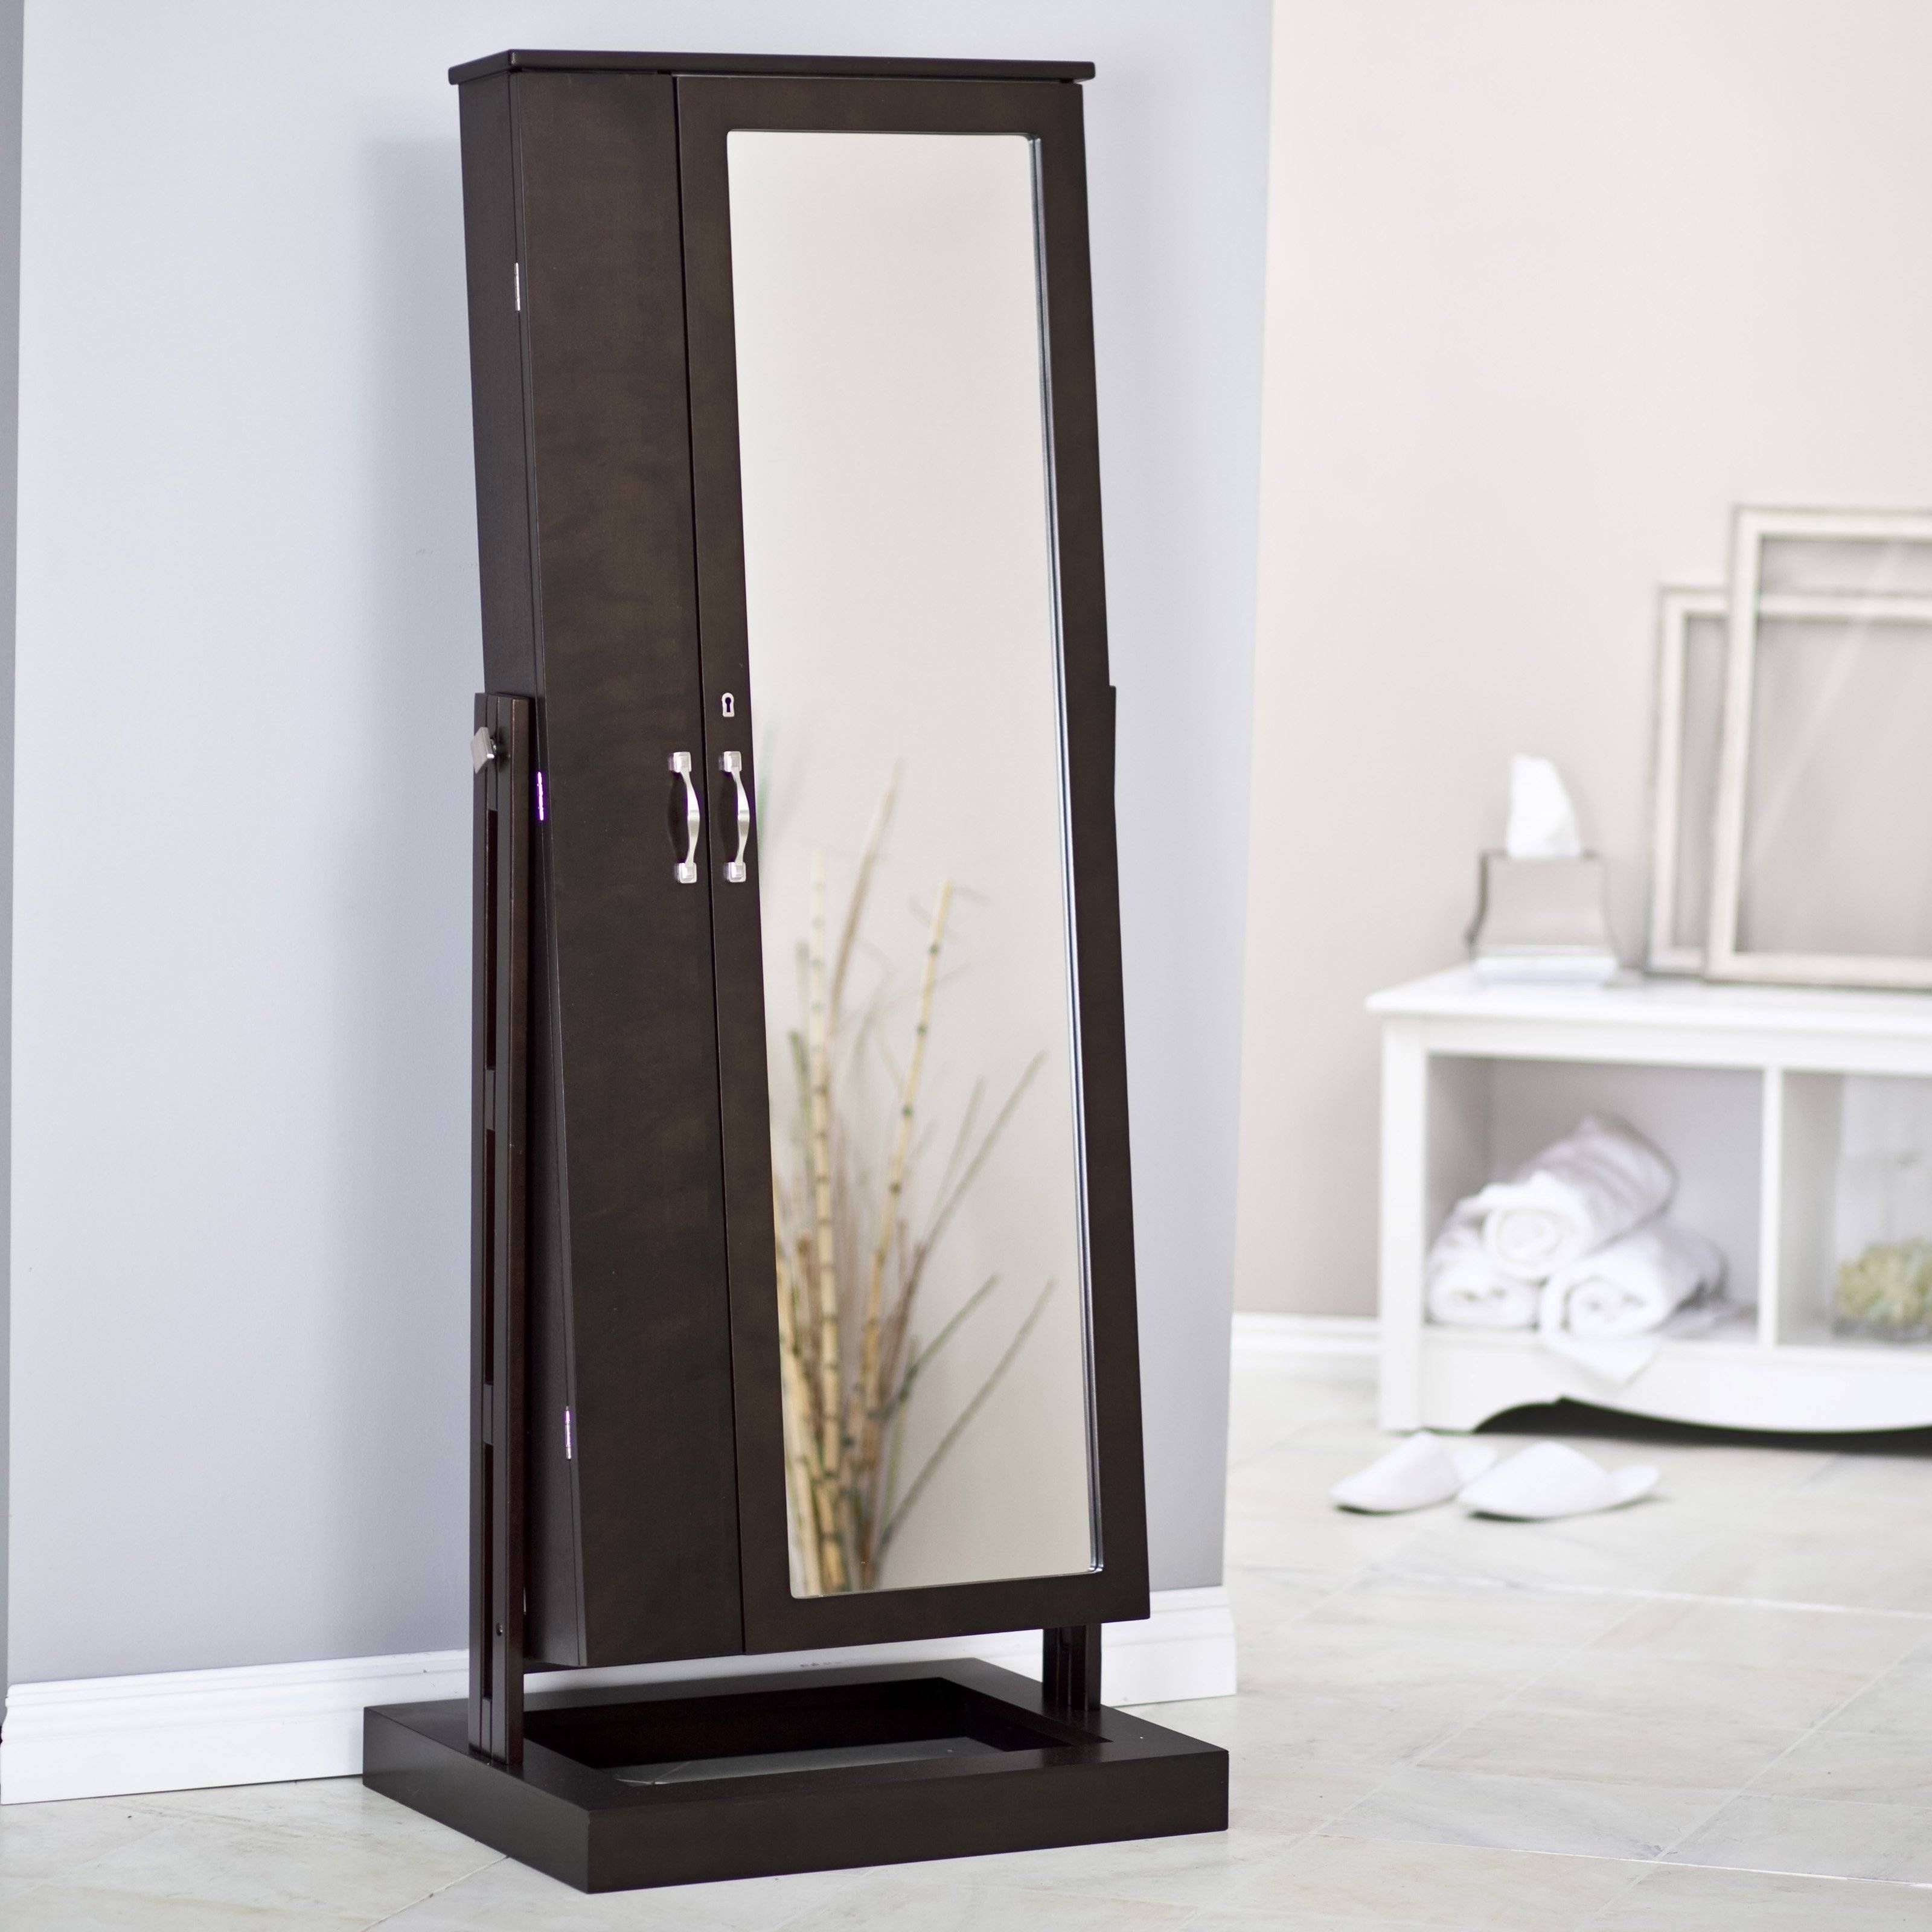 Furniture: Charming Cheval Mirror Jewelry Armoire Ideas With Modern Free Standing Mirrors (View 7 of 15)